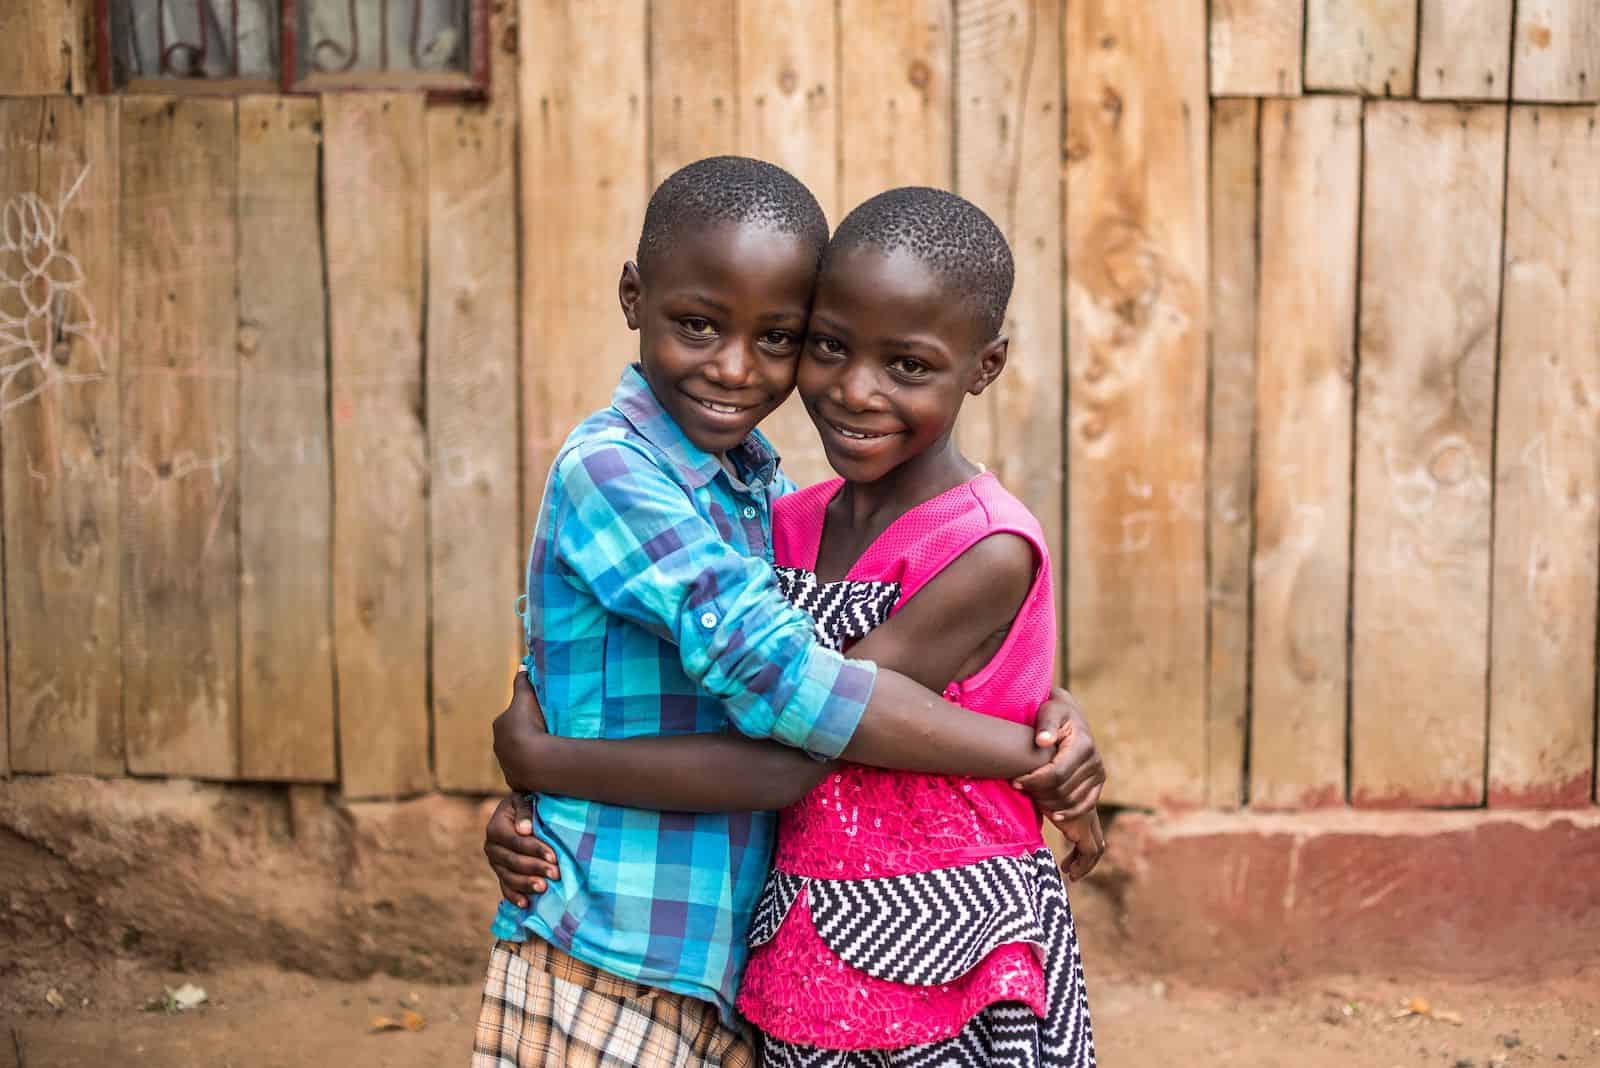 How to Help Kids in Need: Two girls hug each other, standing in front of a wooden home